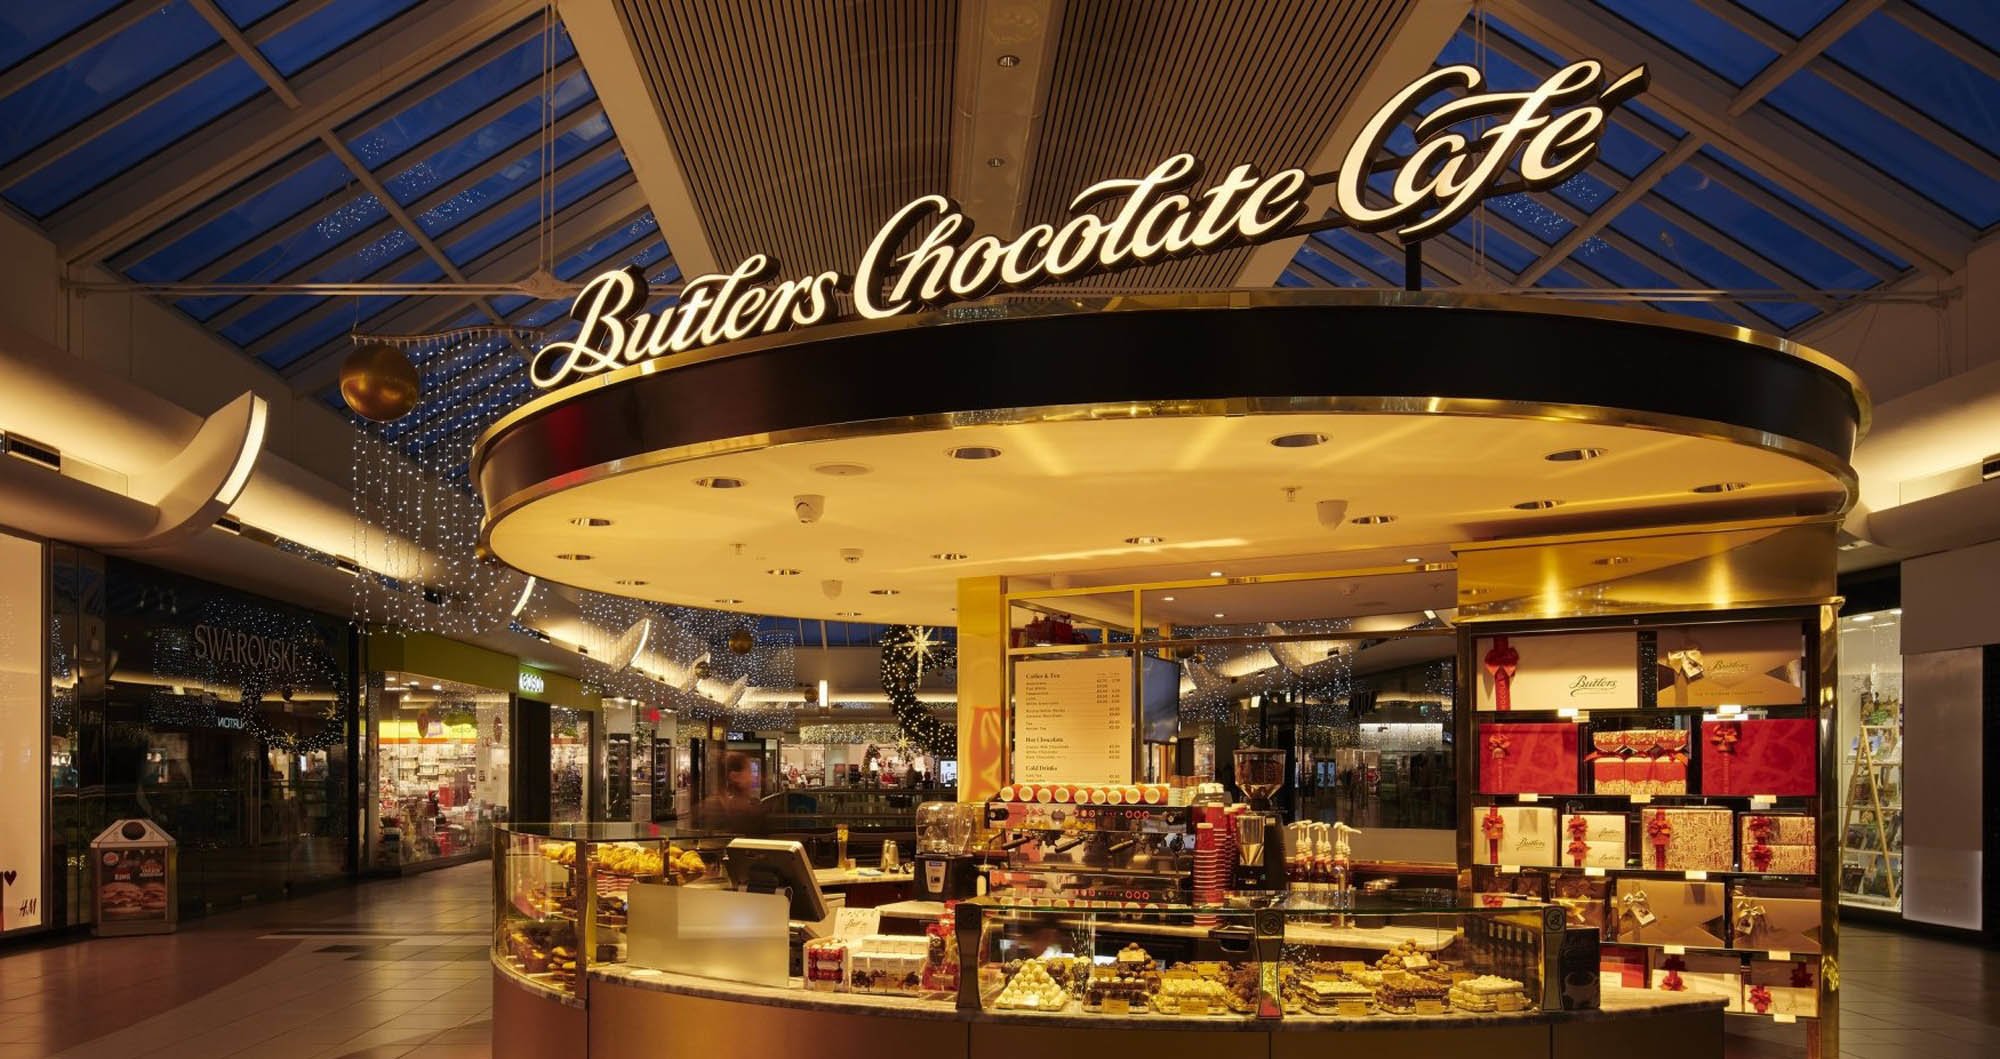 Butlers Chocolates Butlers Chocolate Café Kiosk @ Blanchardstown Centre 